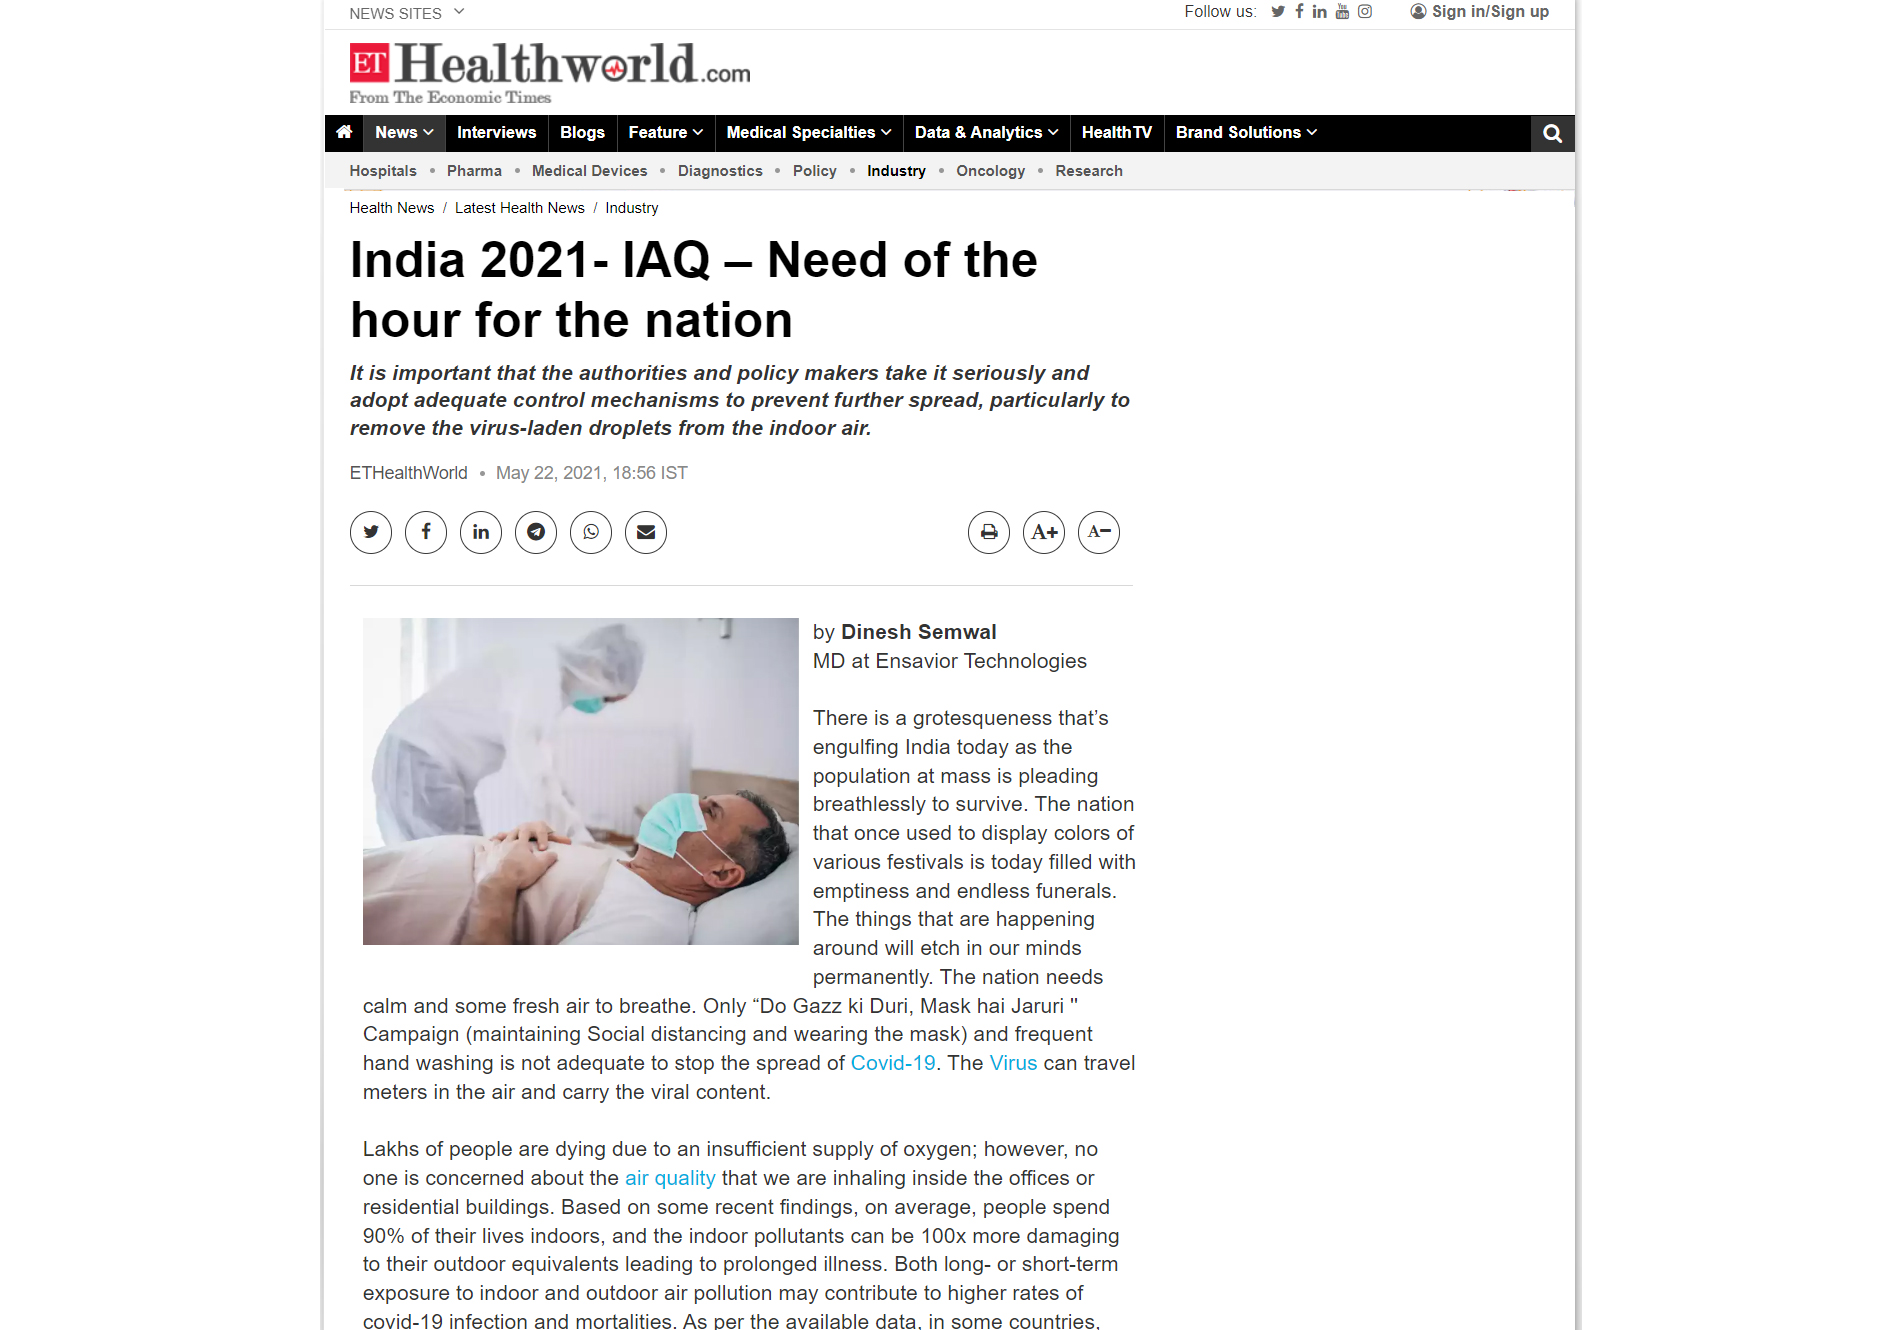 India 2021- IAQ – Need of the hour for the nation